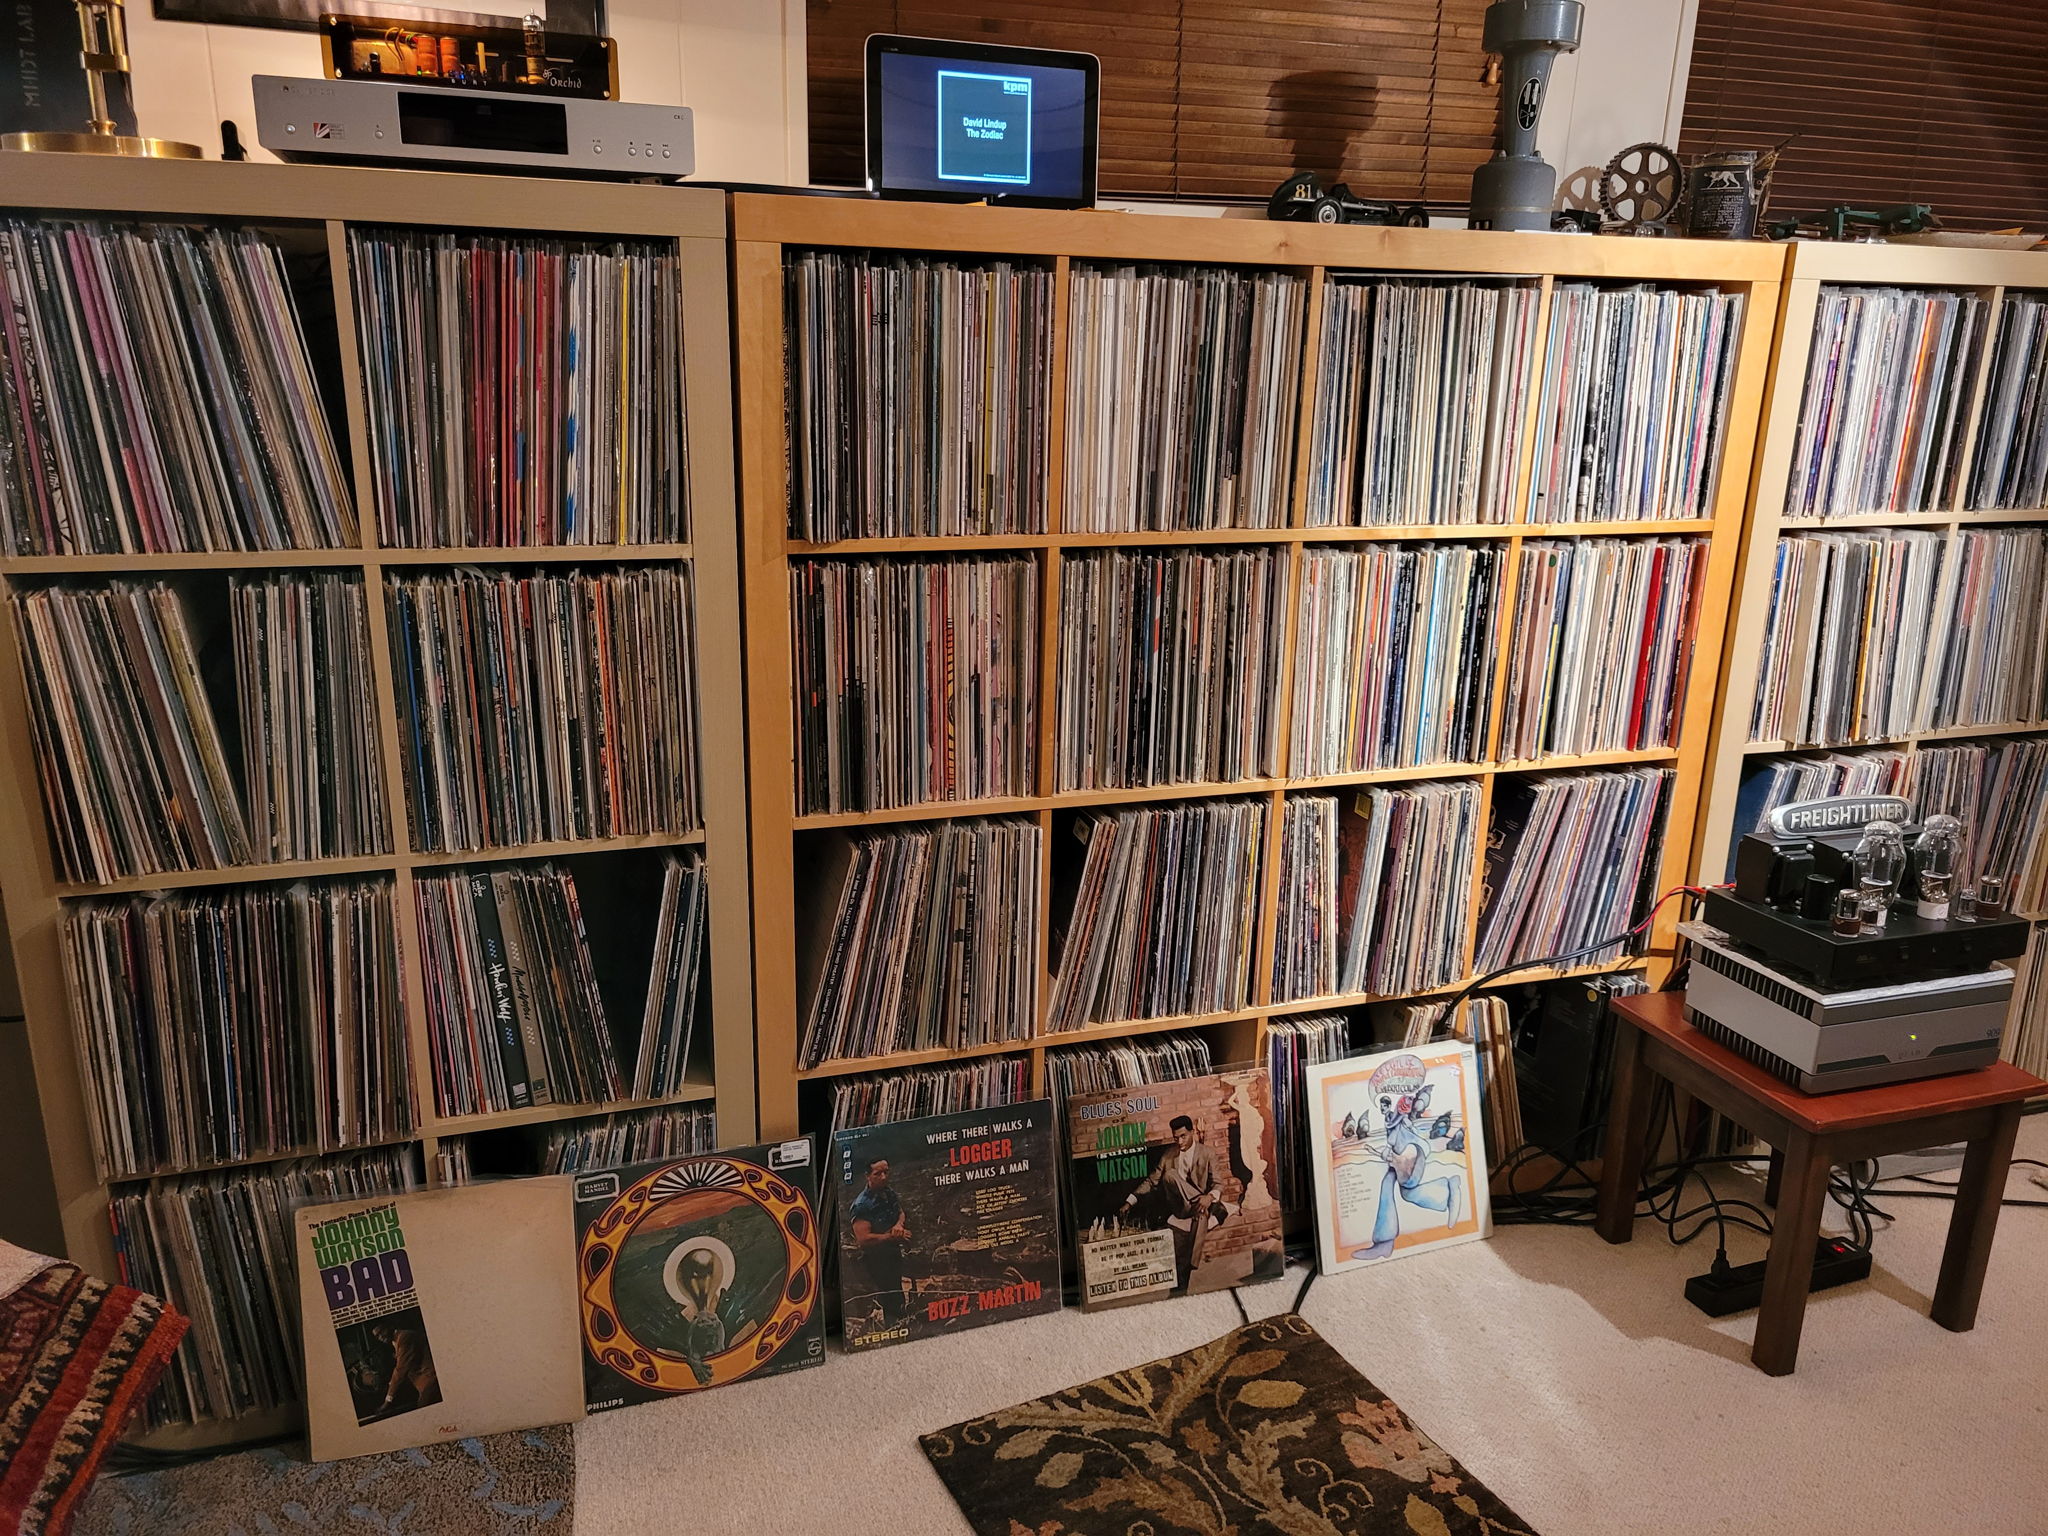 Part of the vinyl collection